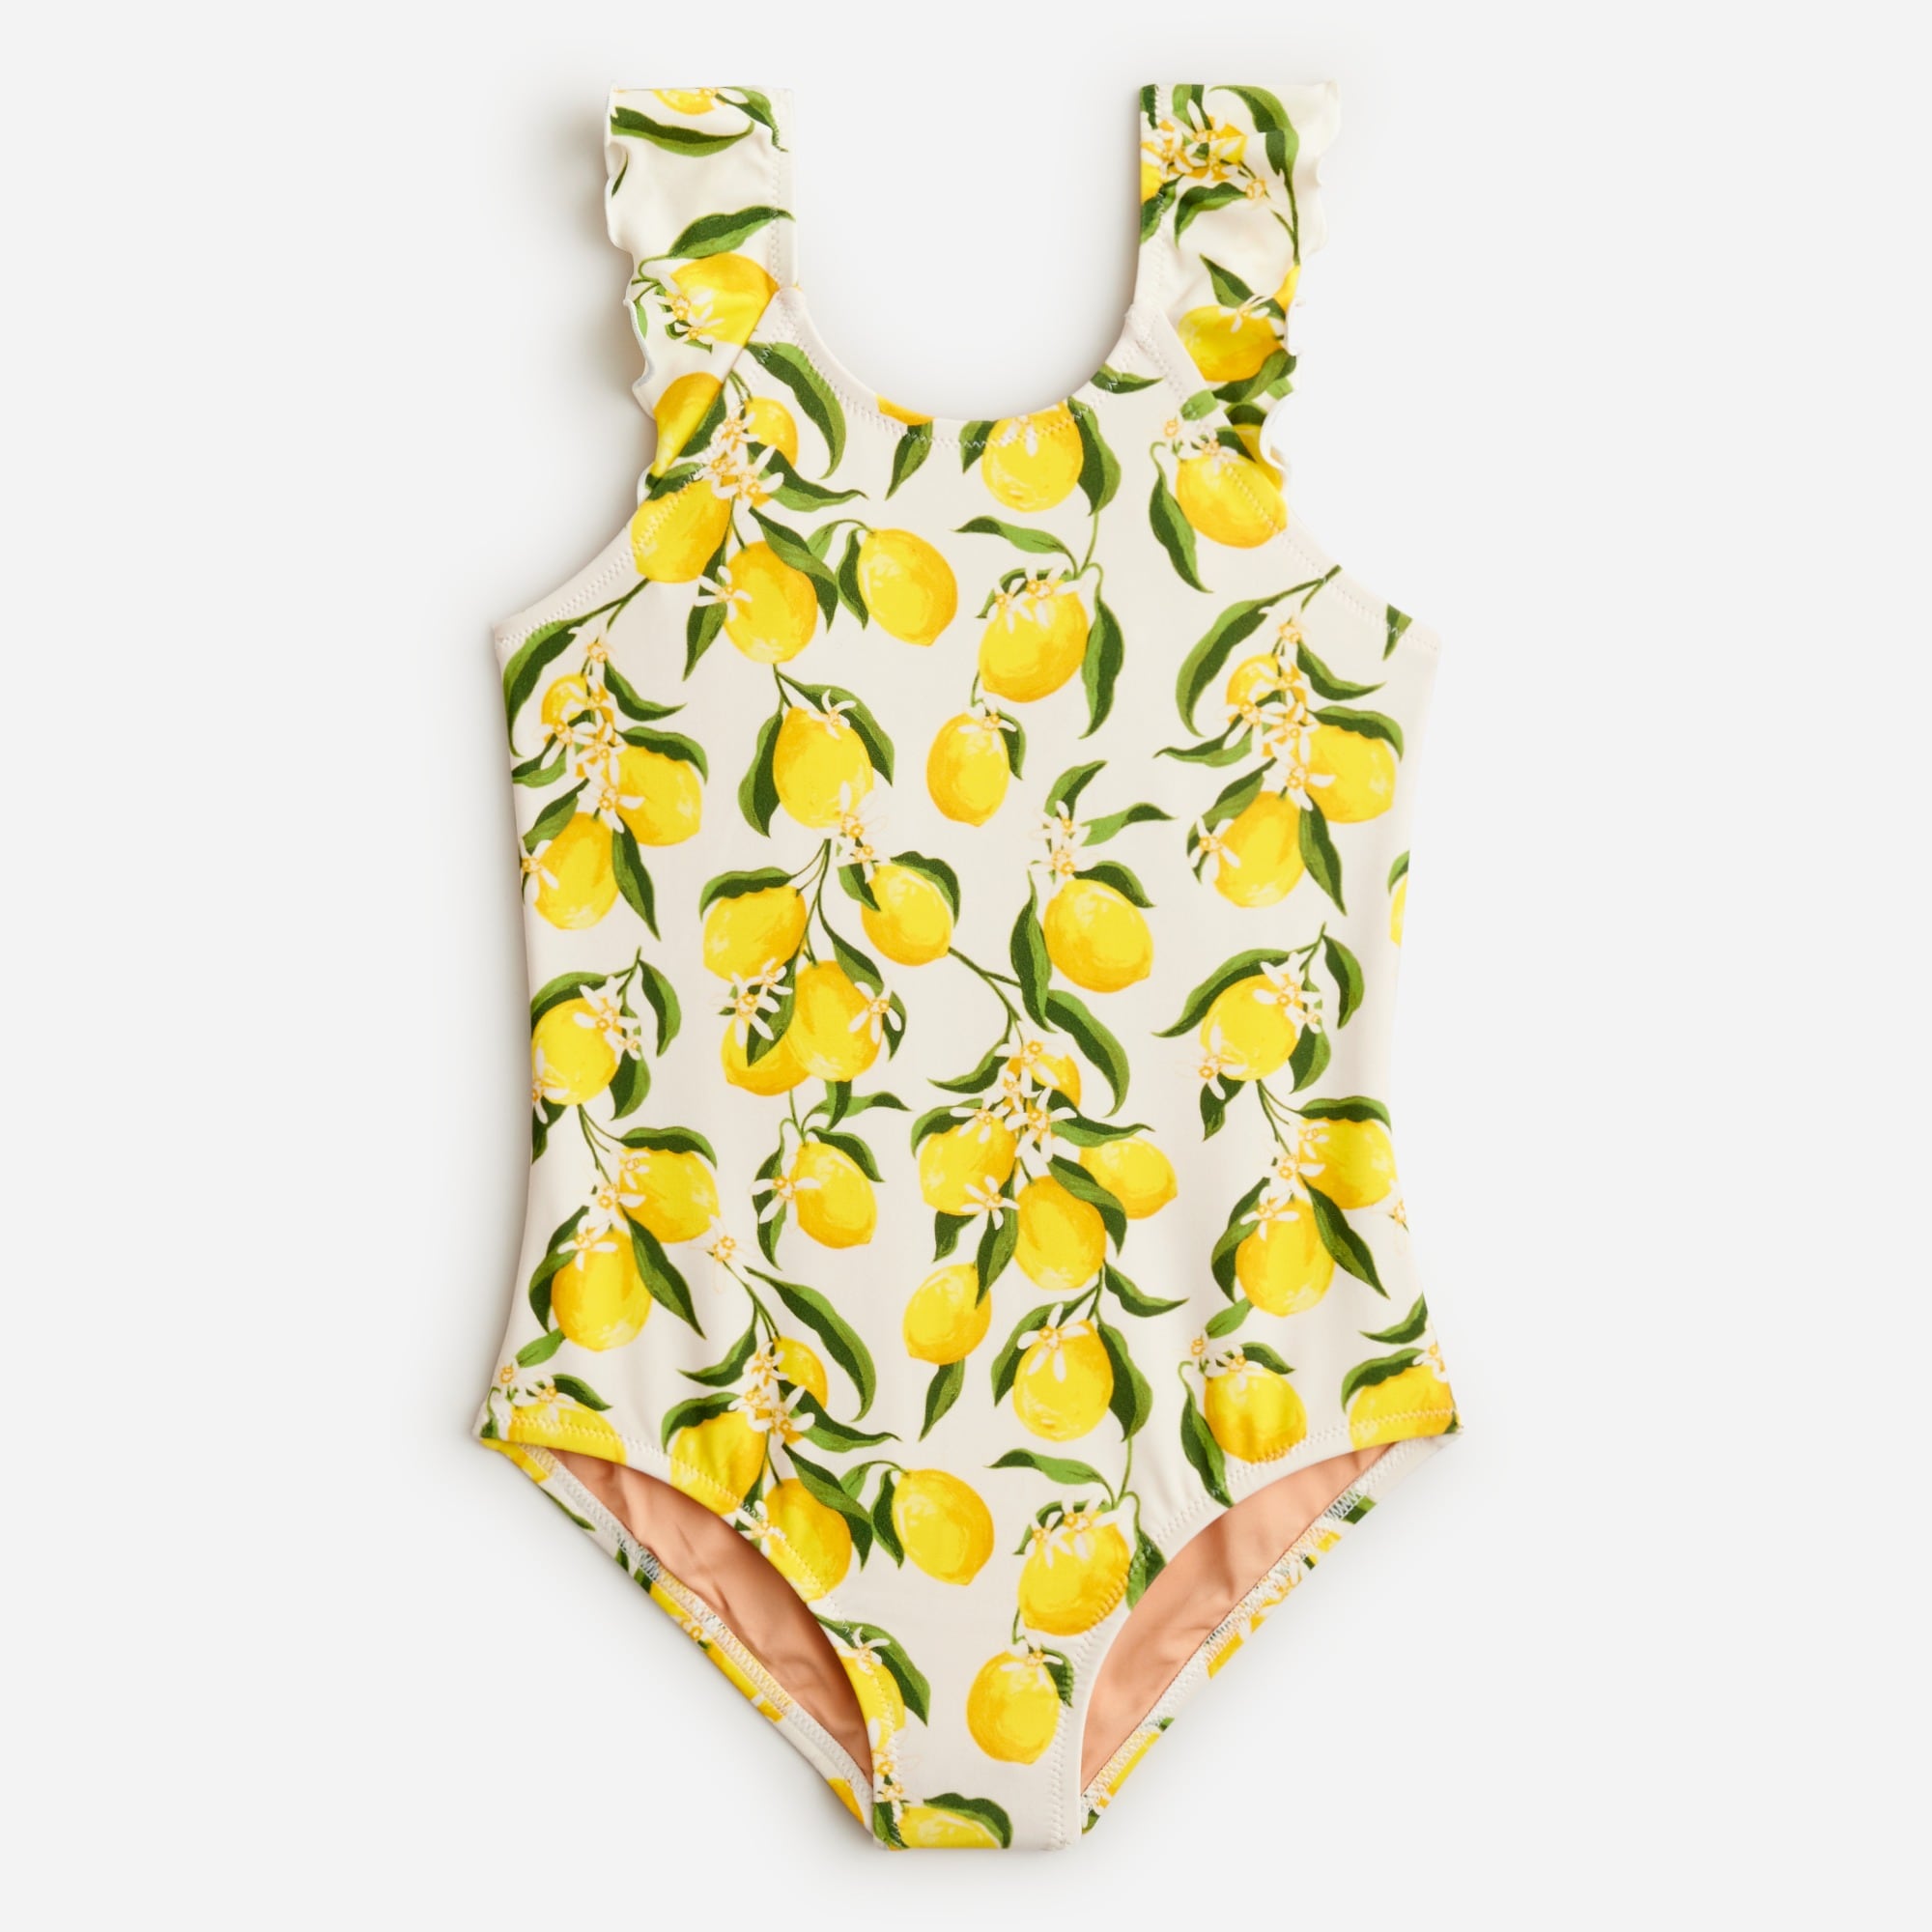  Girls' ruffle scoopneck one-piece swimsuit with UPF 50+